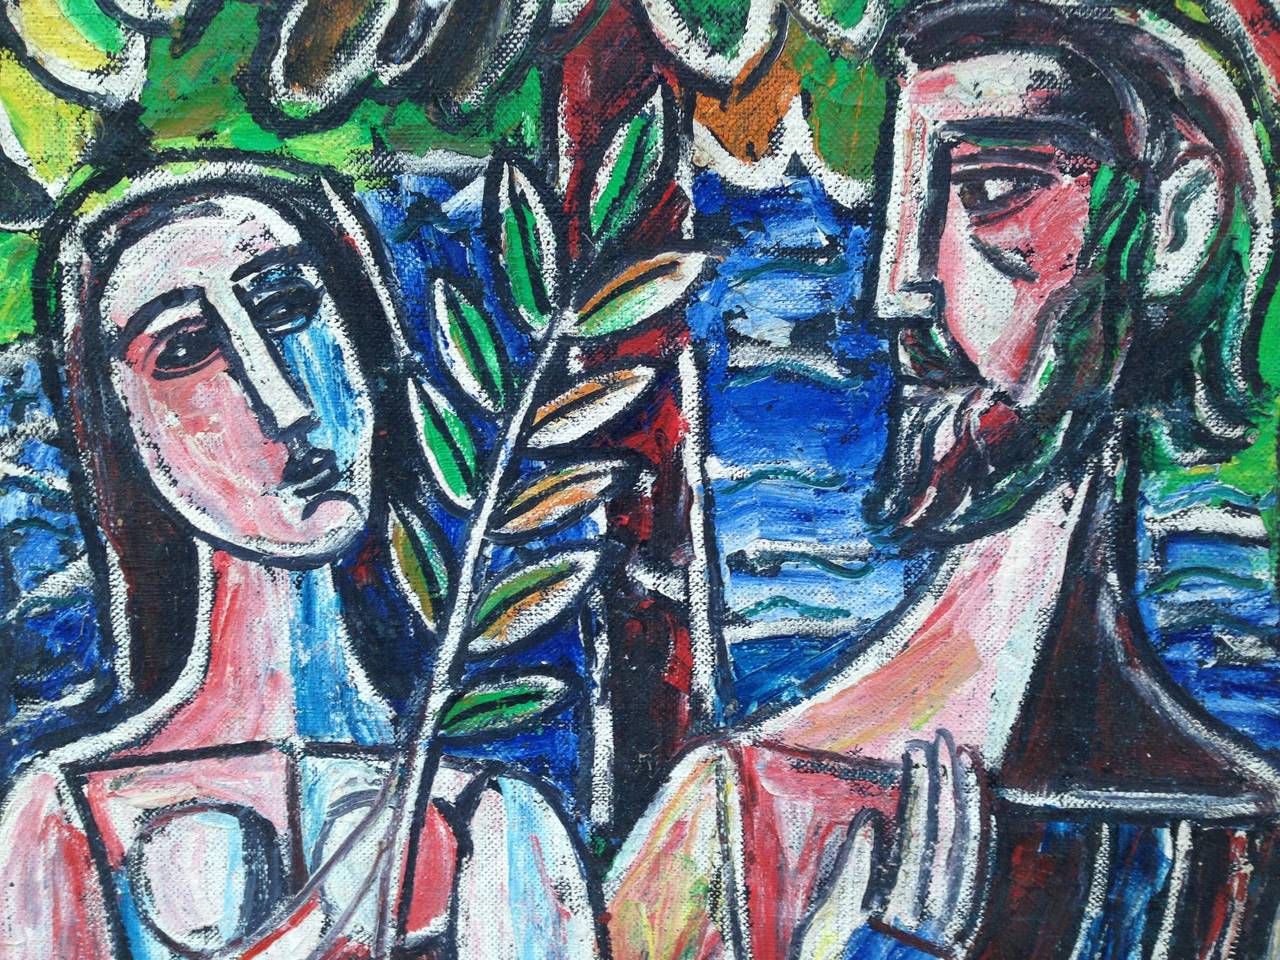 Jankay's works and paintings influenced by famous iconic artist such as Chagall, Matisse and Picasso. His work shows happiness and love of life and celebrating woman.

Biography of Tibor Jankay (1899-1994).

Tibor Jankay was born 1899 in